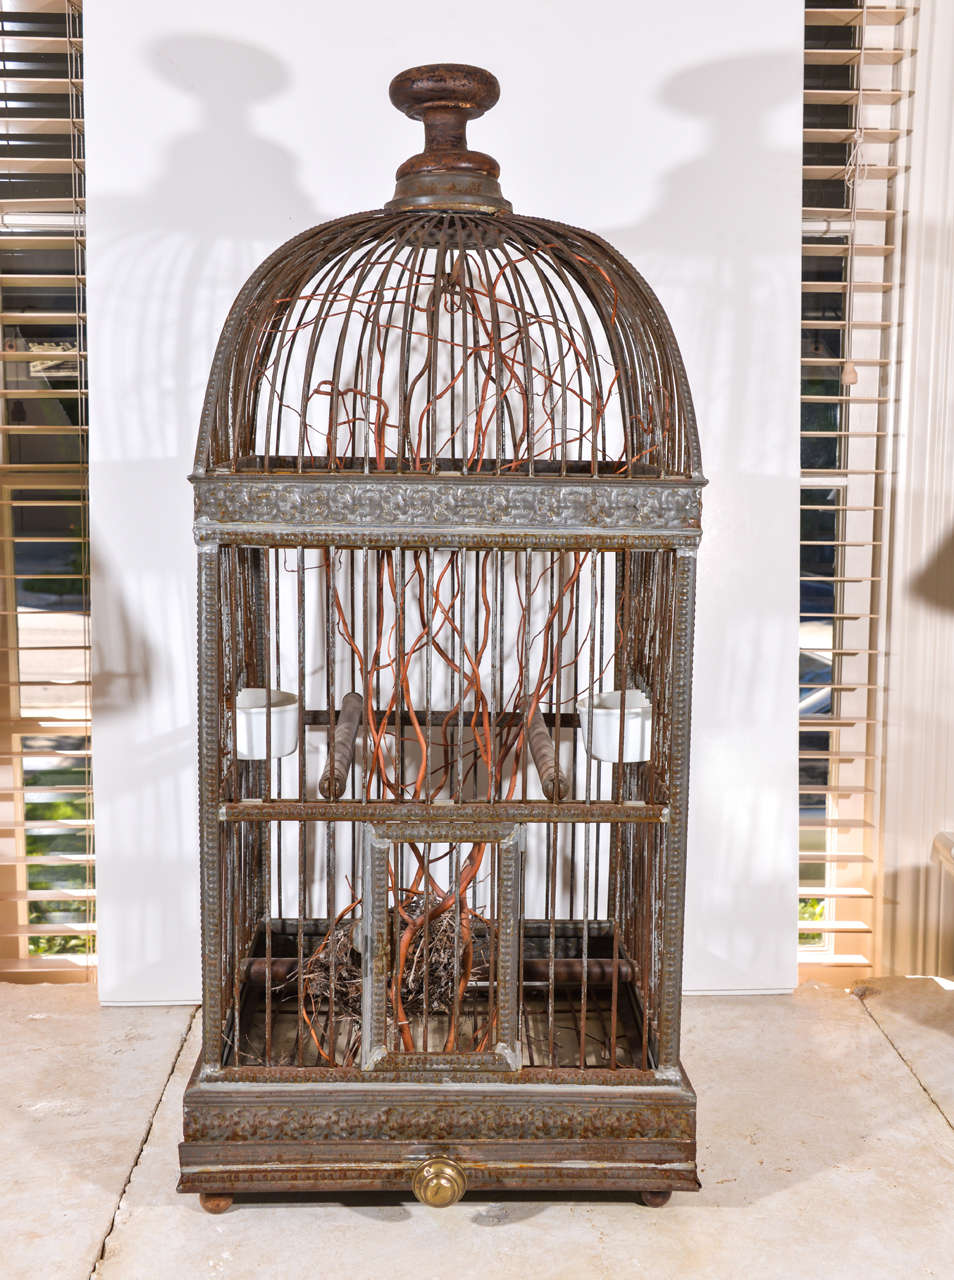 This is a beautiful and functional bird chateau with pull-out enameled floor liner and porcelain feeding stations, as well as three wood perches and a swing. It is currently displayed with branches and a nest on the interior.